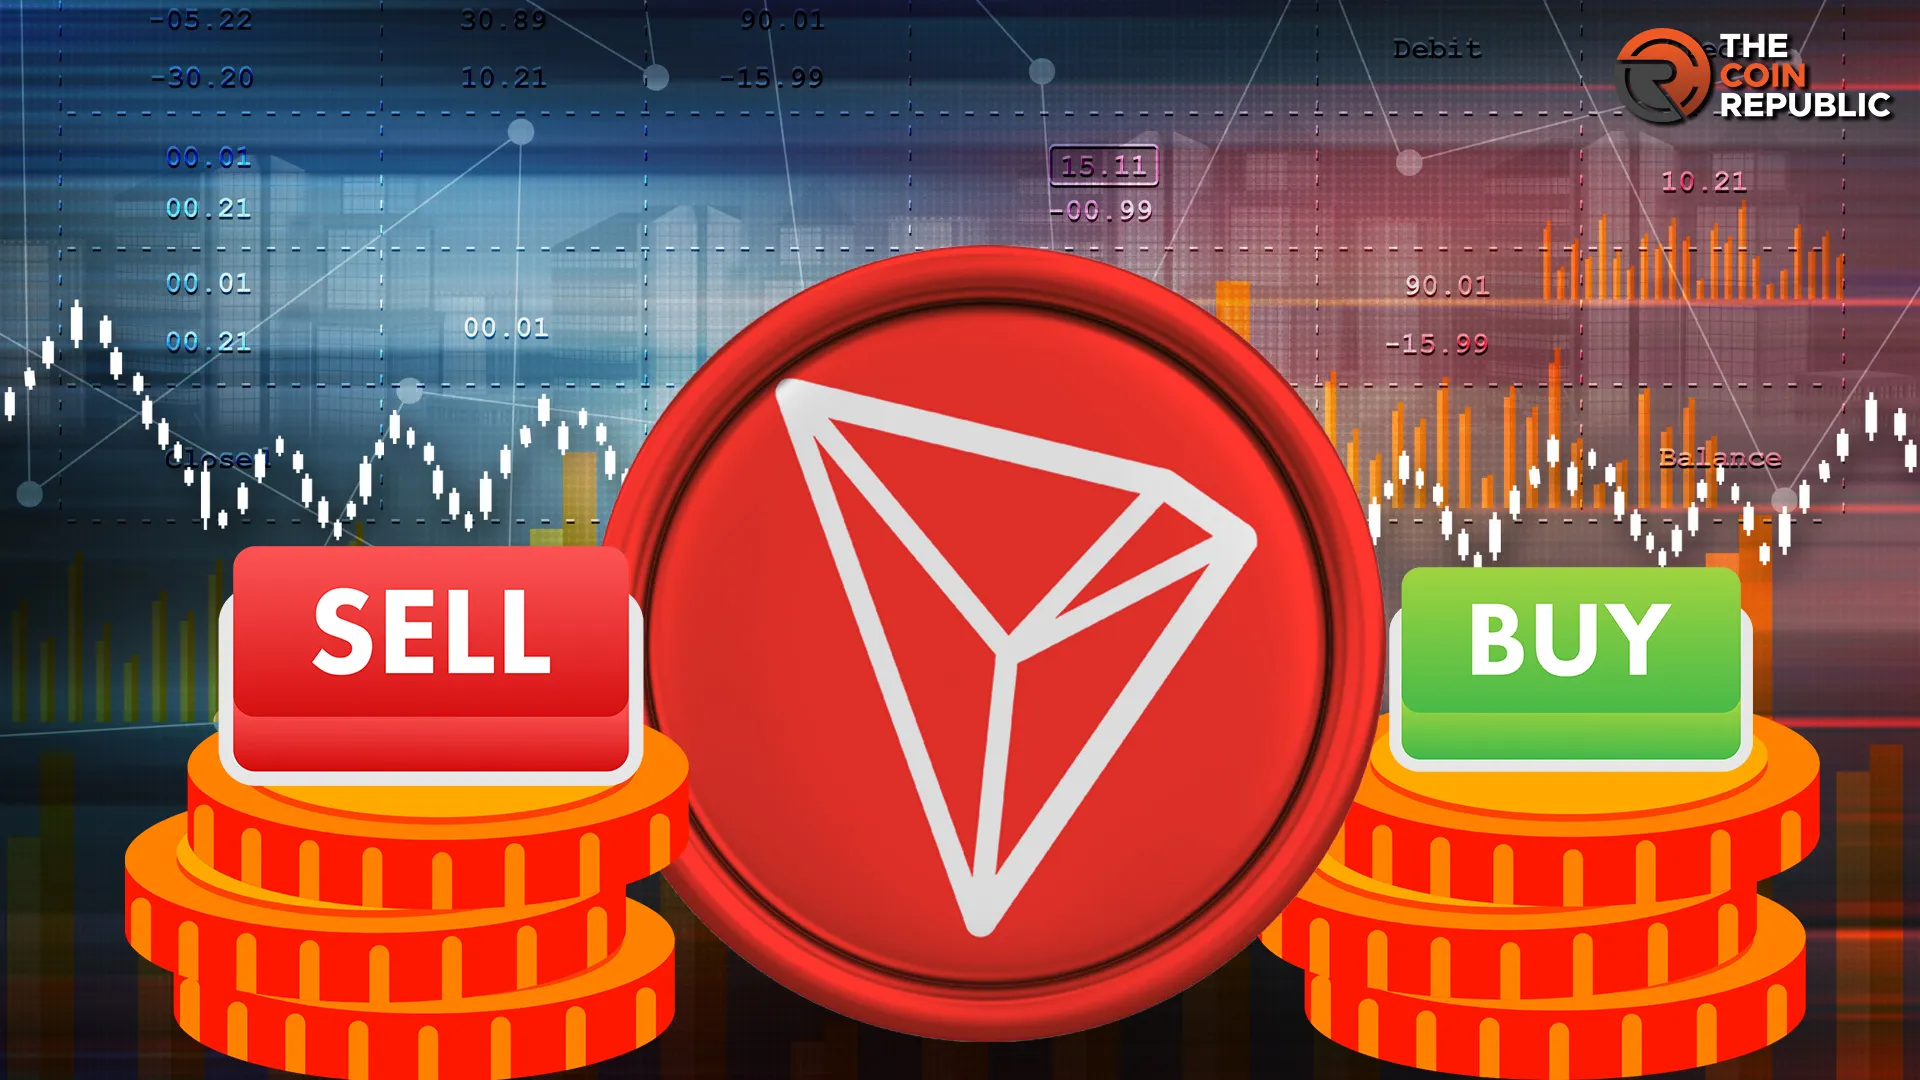 TRON Price is Draining Gains: A Reversal or a Buying Opportunity?